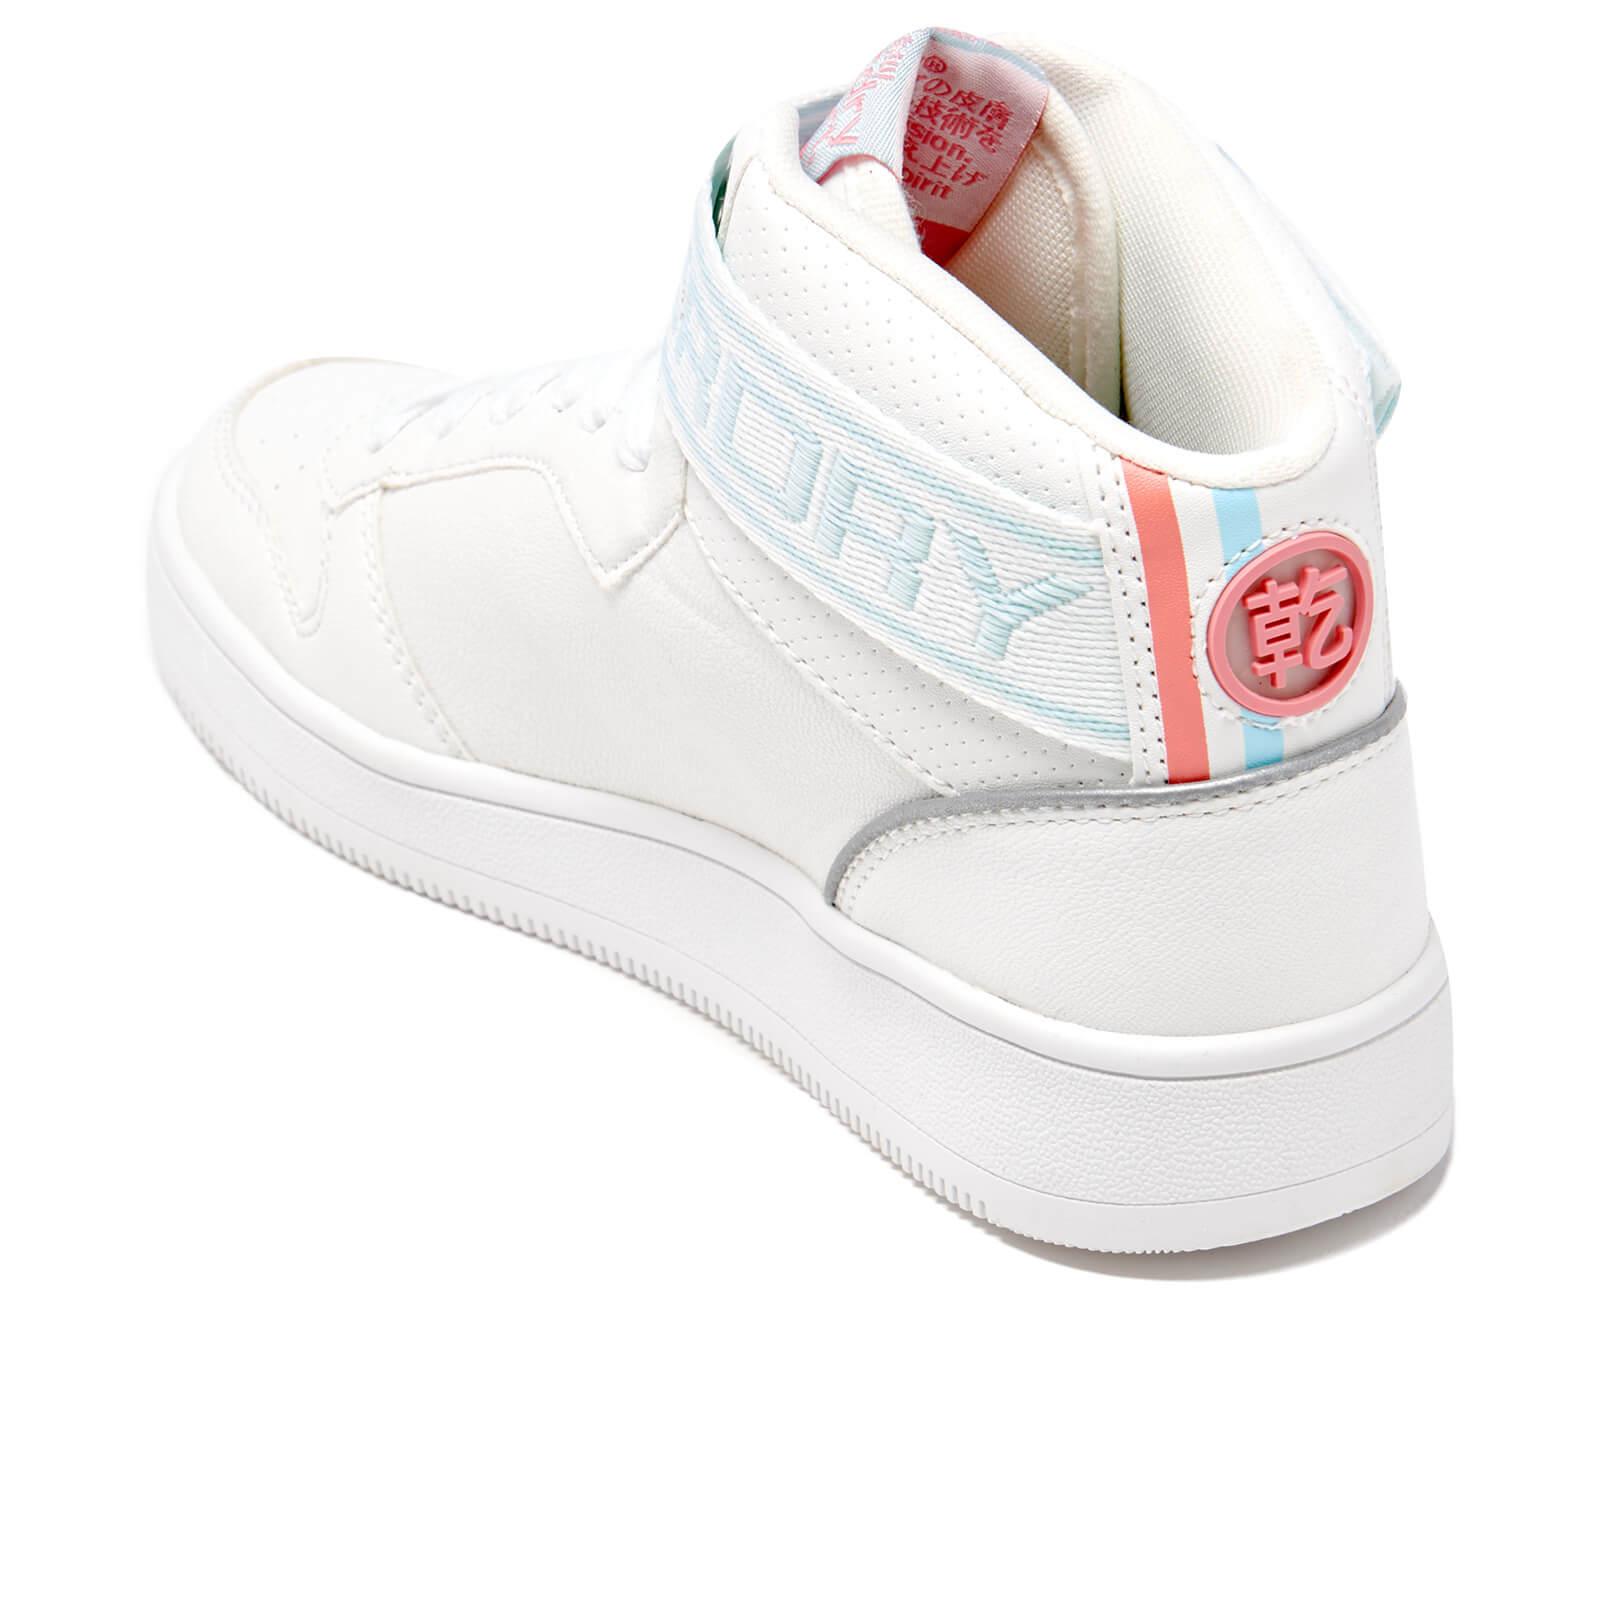 Superdry Basket High Top Trainers in White - Lyst